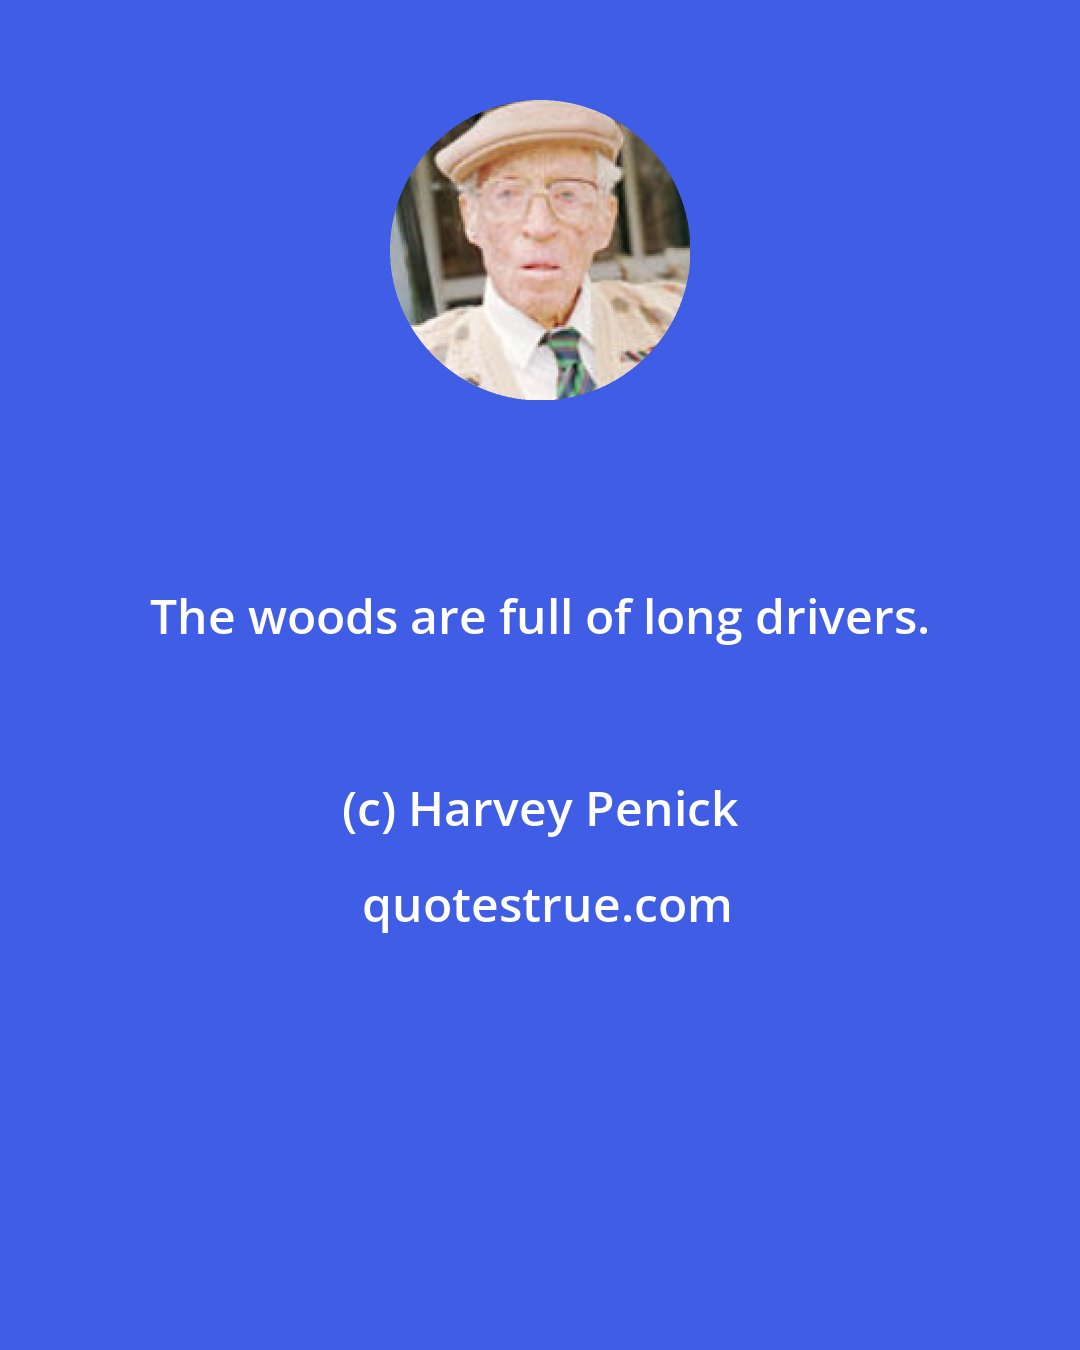 Harvey Penick: The woods are full of long drivers.